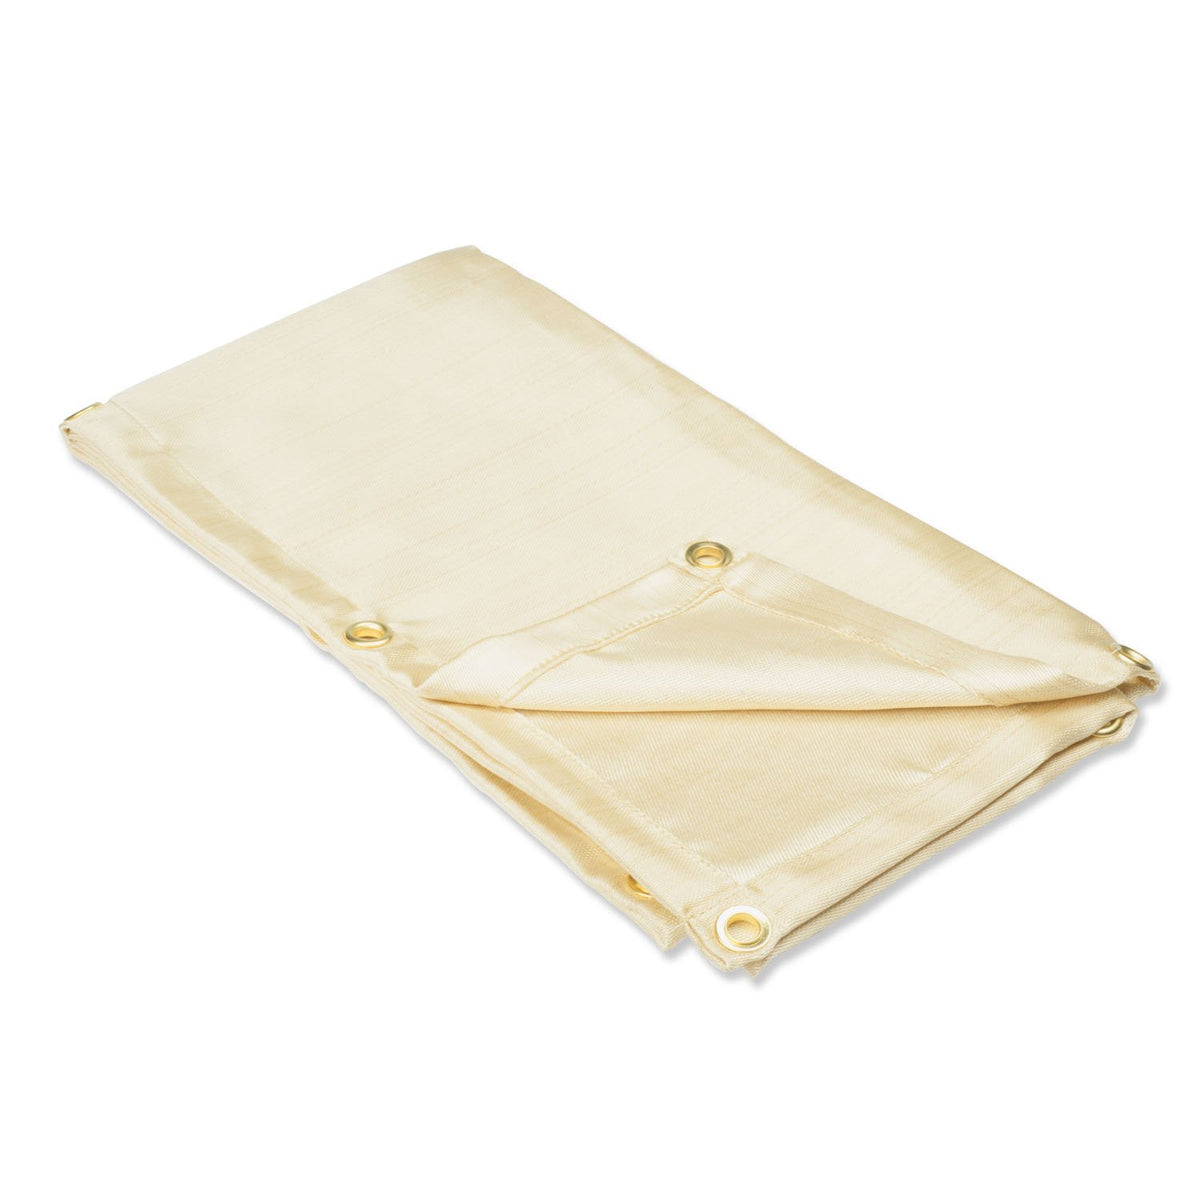 Heavy Duty Fiberglass Welding Blanket and Cover with Brass Grommets 4 FT x 6 FT